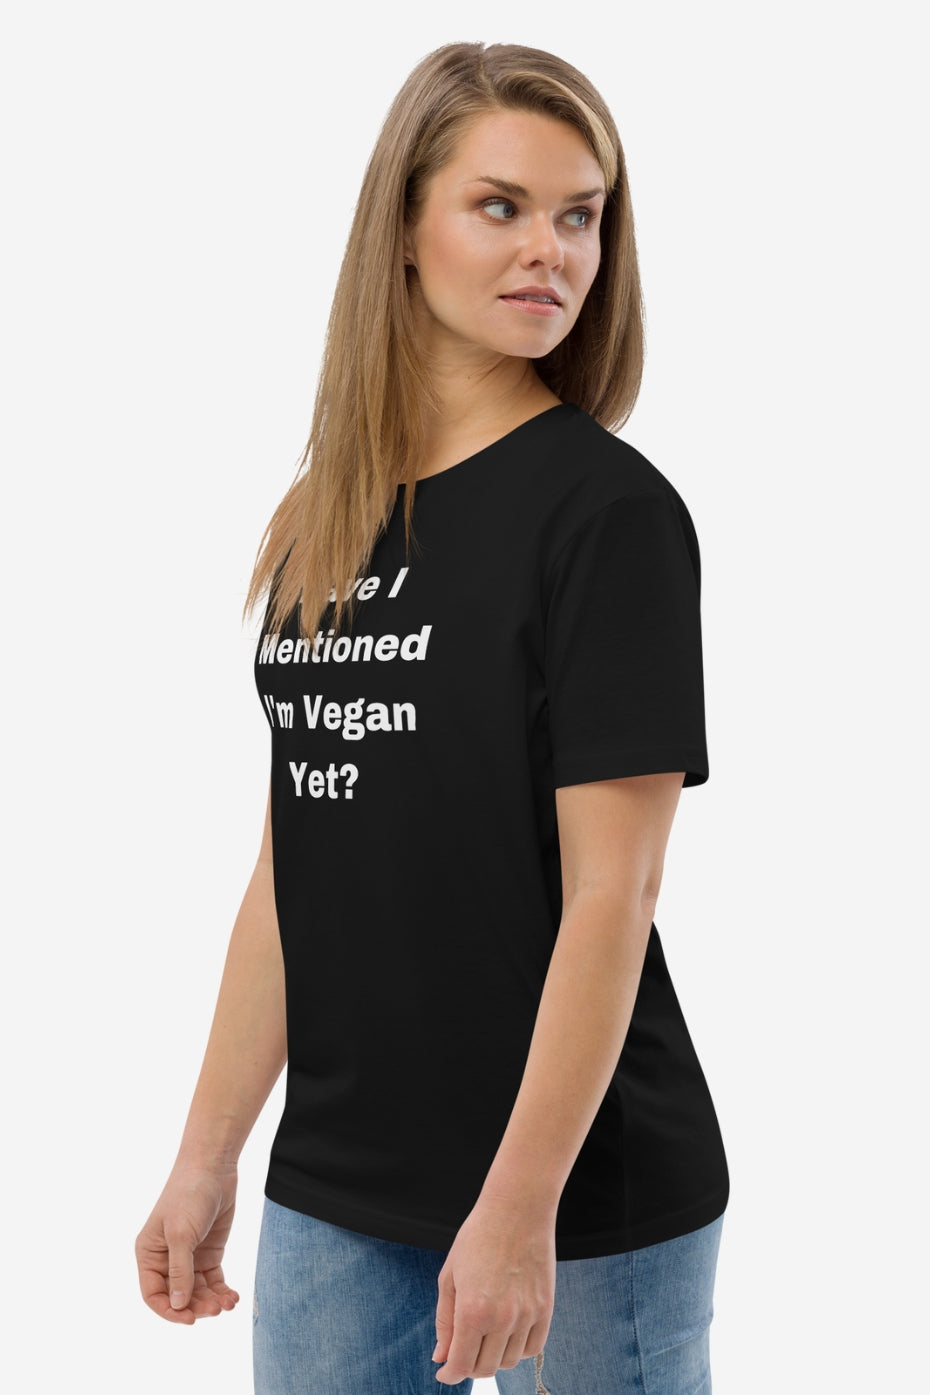 Have I Mentioned Unisex T-Shirt